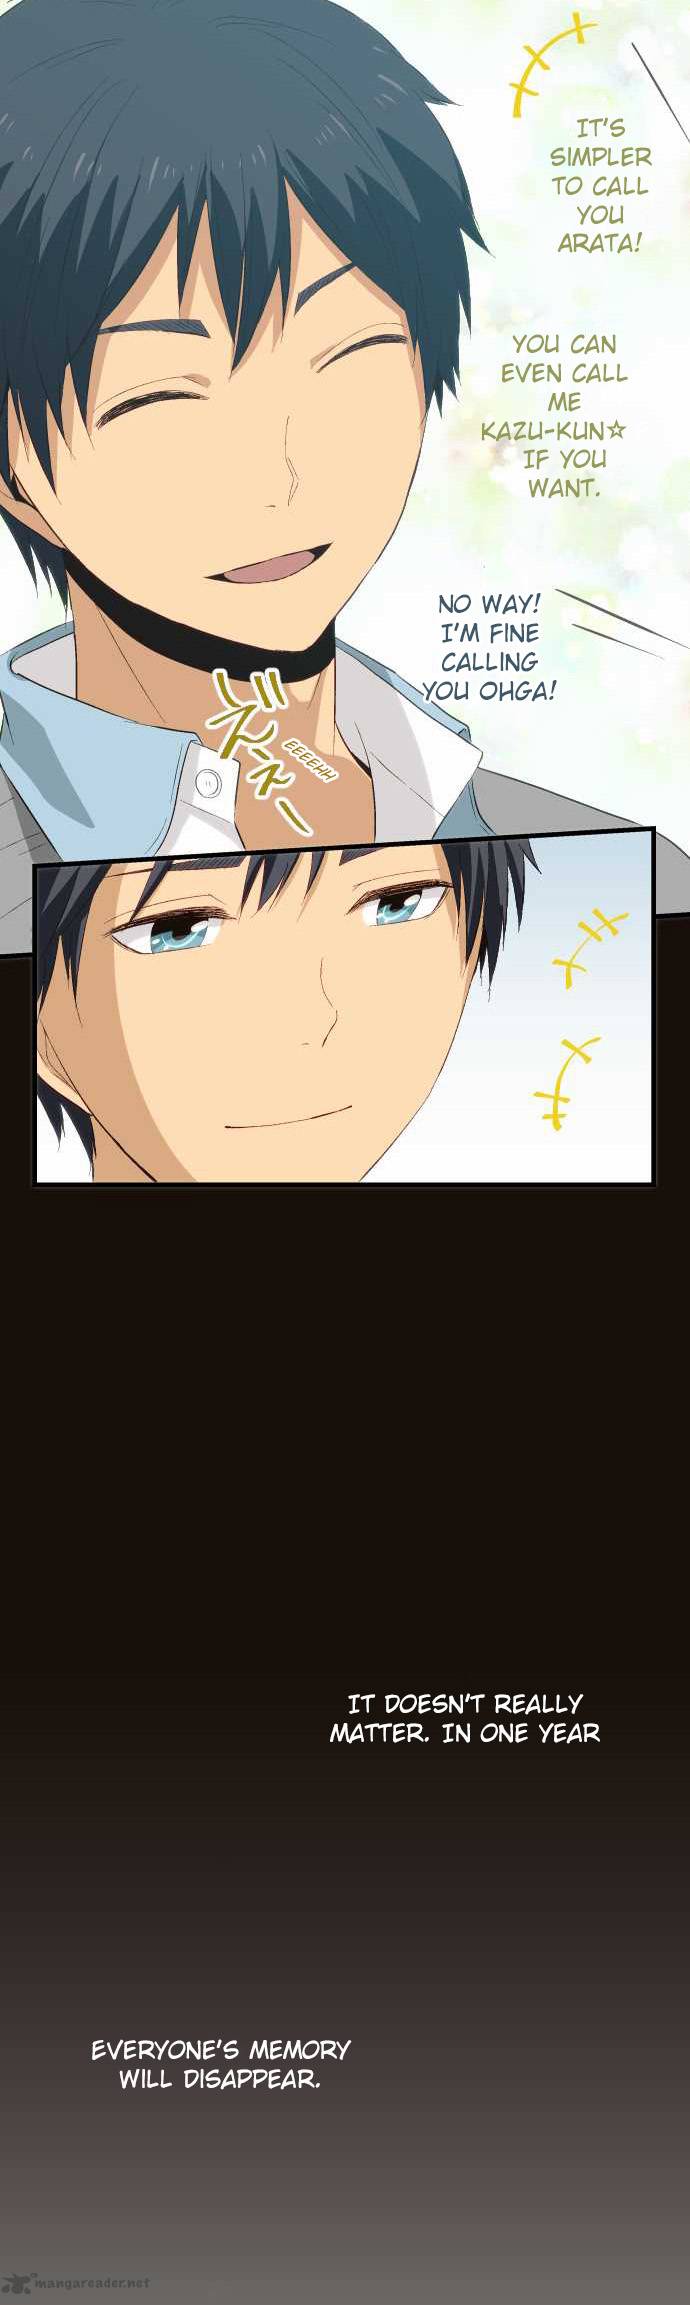 relife_20_14